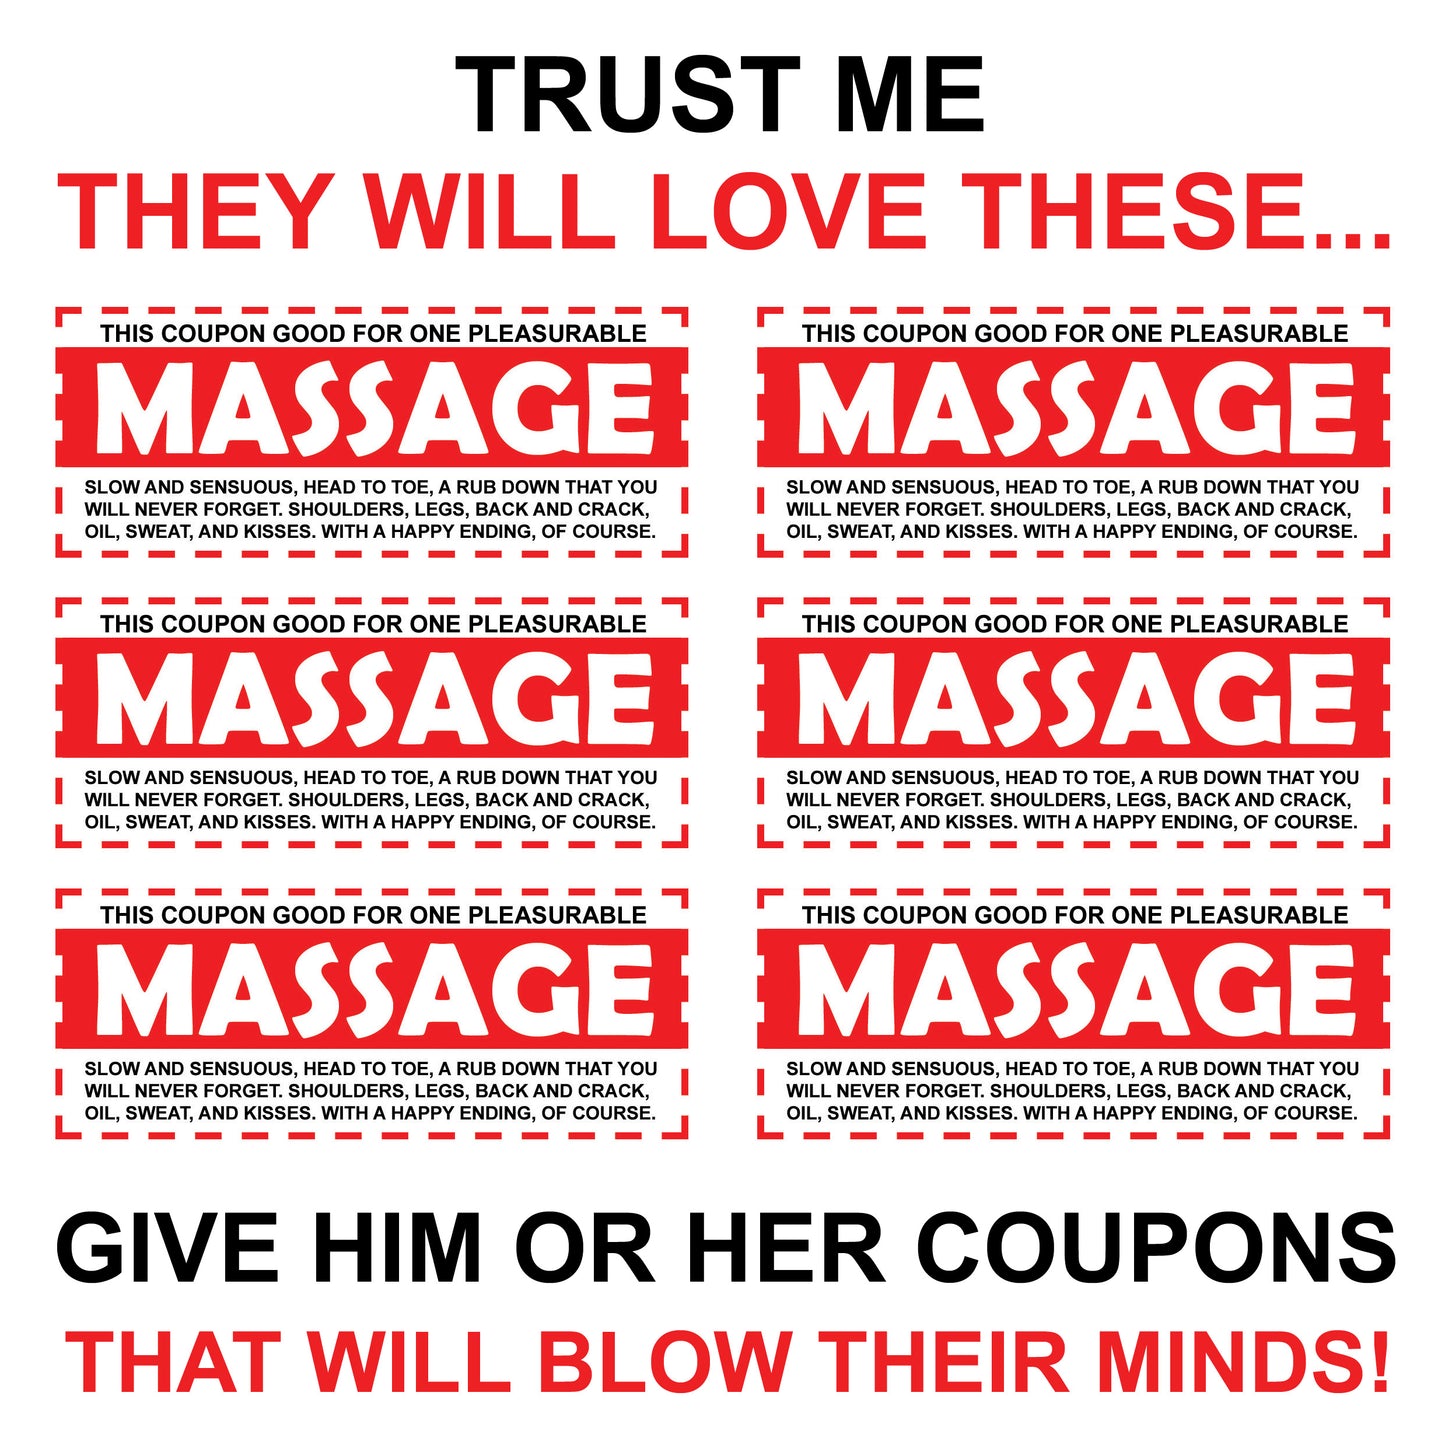 Massage Coupons for Him, Her, Husband, Wife, Boyfriend, Girlfriend, Romance, Love - PDF File to Print and Use!